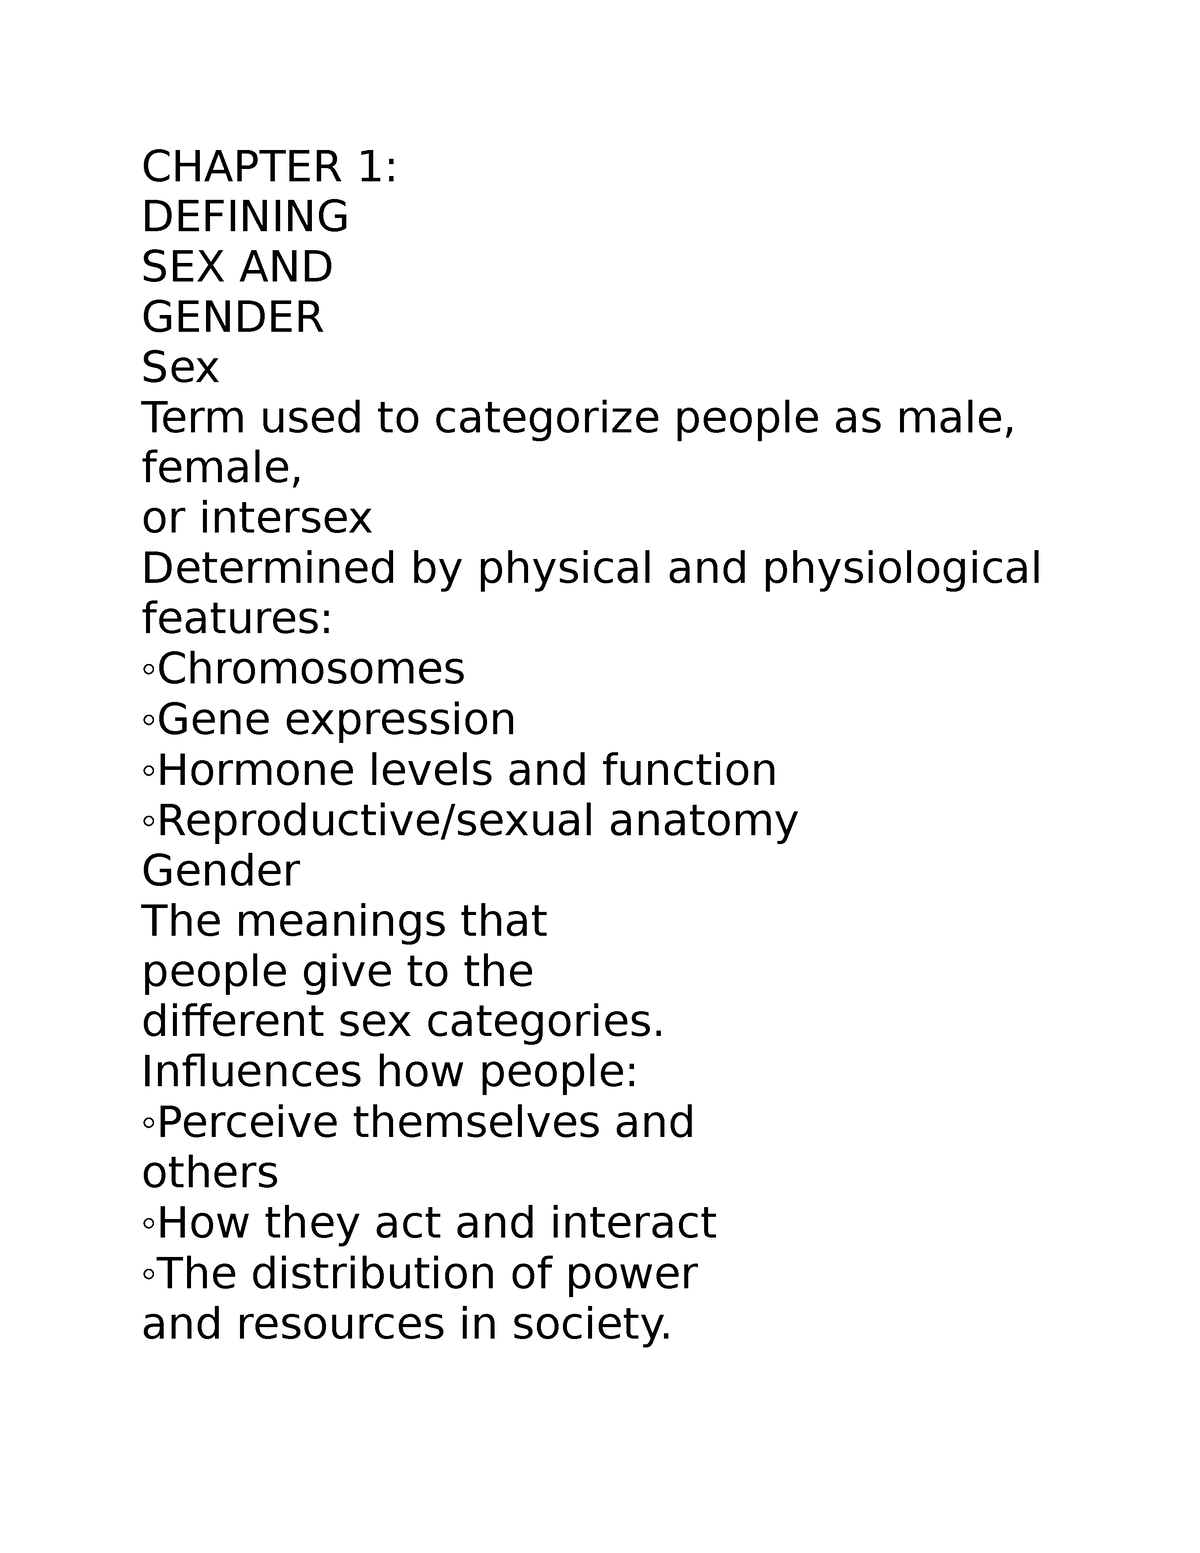 Sex And Gender Notes Chapter 1 Defining Sex And Gender Sex Term Used To Categorize People 